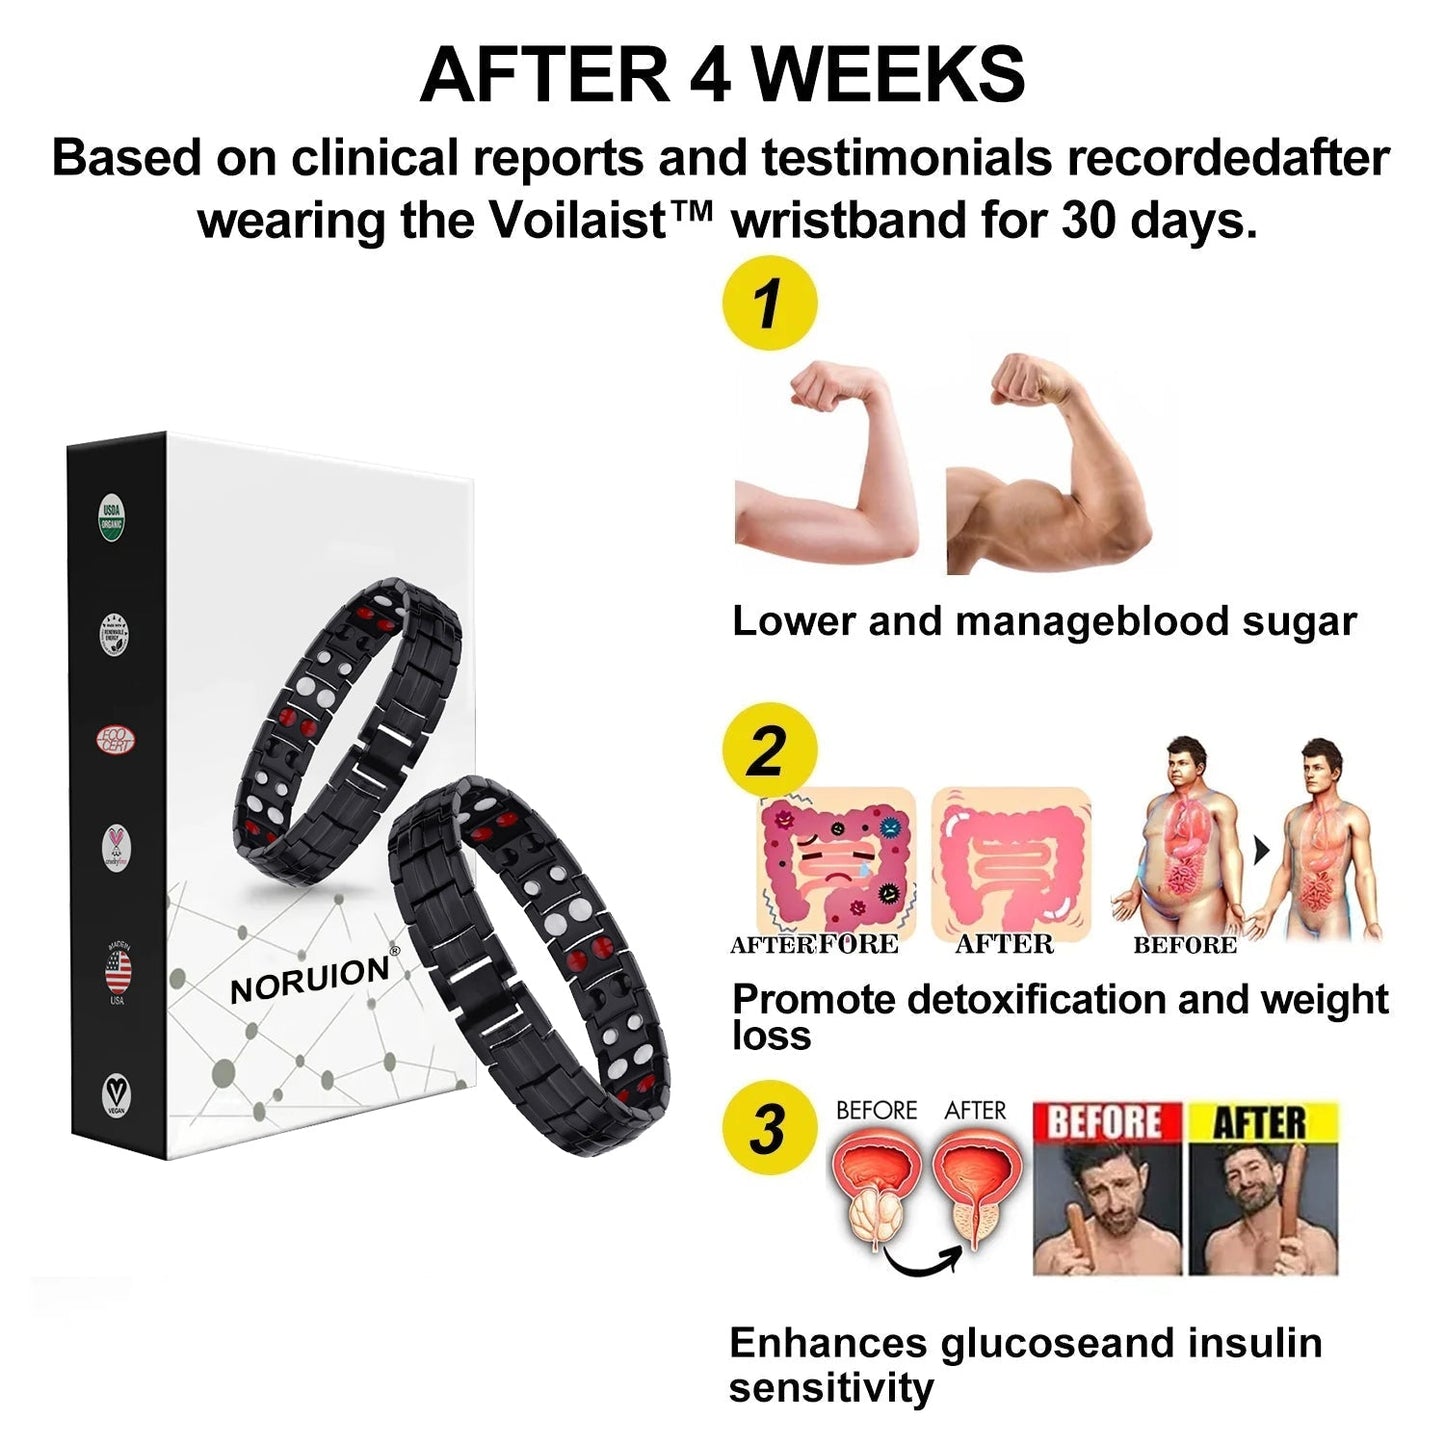 😍😍NORUION® Far Infrared Ionizer Bracelet🎁 Limited time 80% discount.